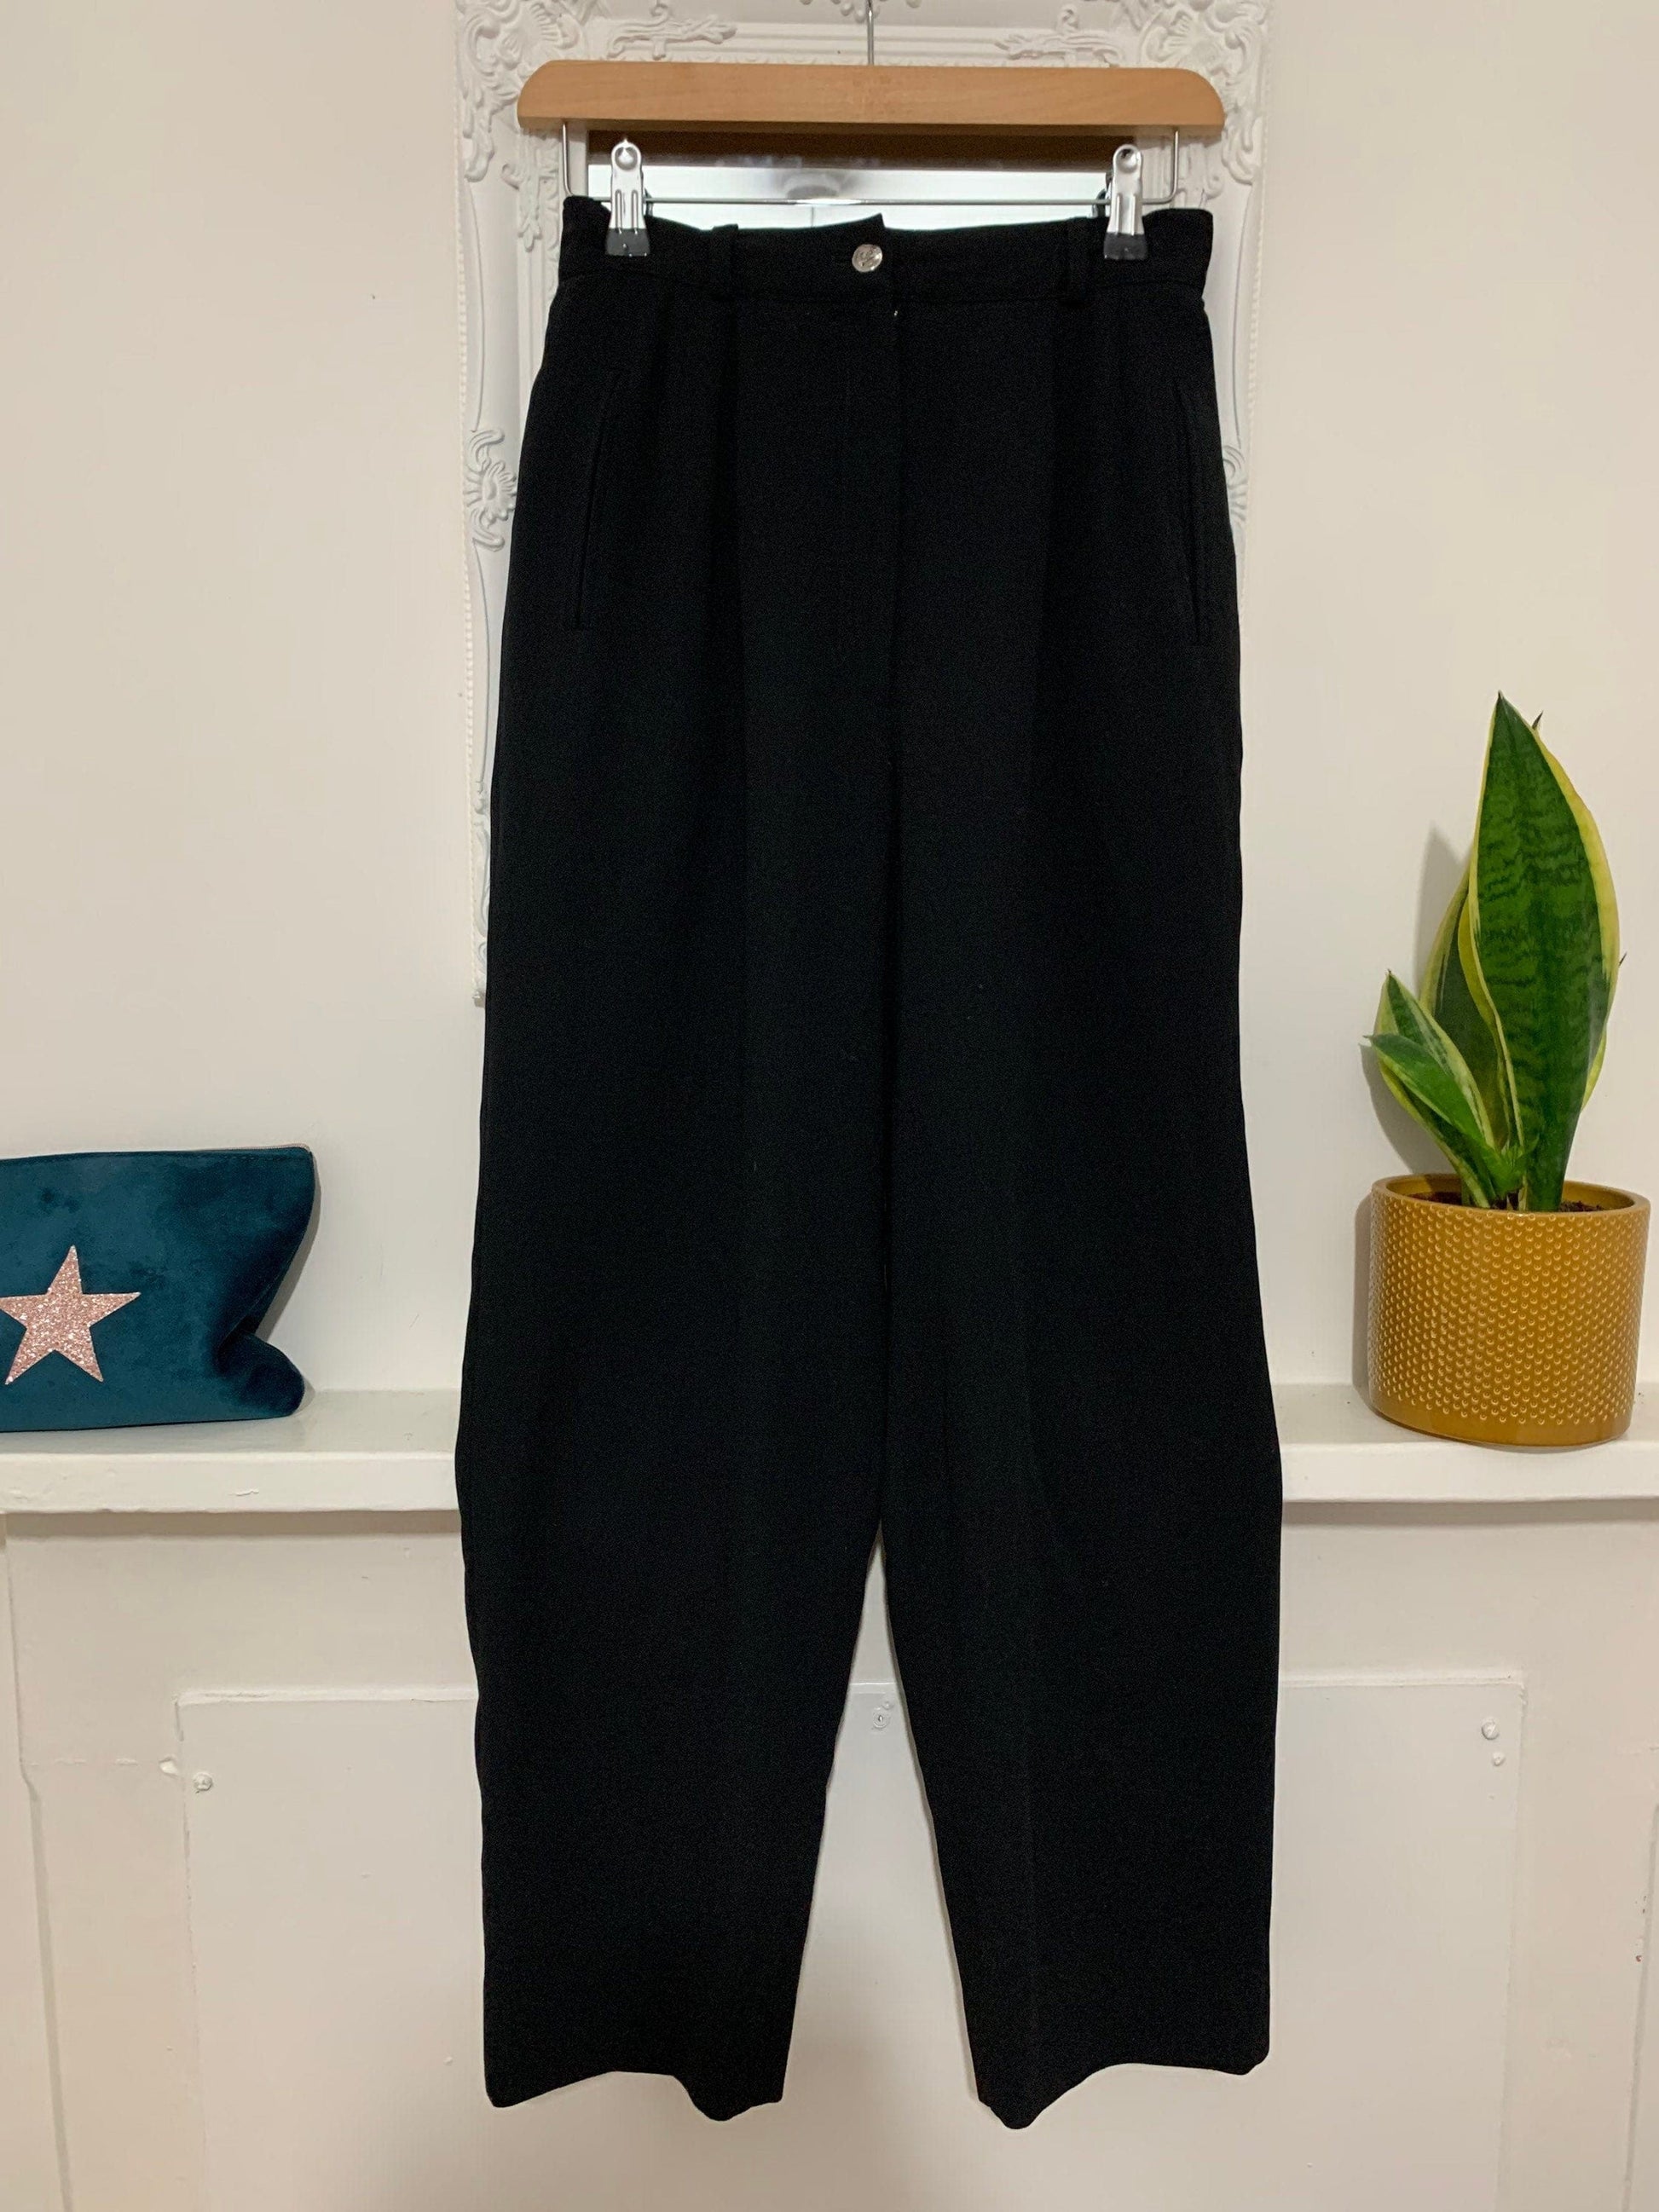 Vintage black trousers High waisted ladies pleated trousers black - with belt loops 80s baggy trousers mom trousers black trouser